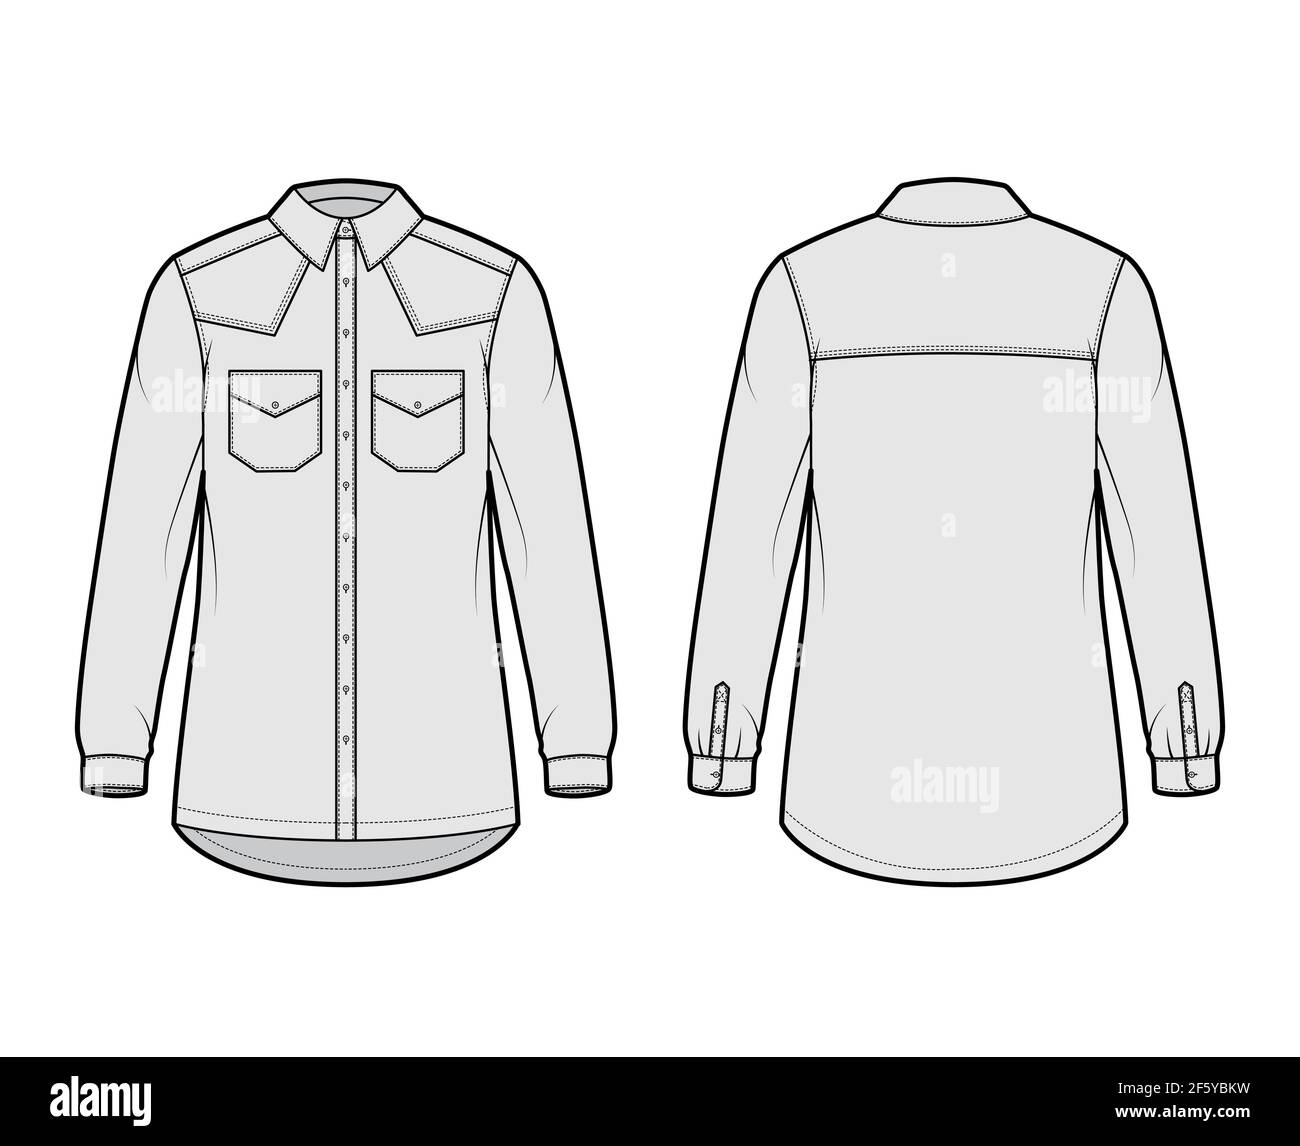 Denim shirt jacket technical fashion illustration with oversized body, pockets, button closure, classic collar, long sleeves. Flat apparel front, back, grey color style. Women, men unisex CAD mockup Stock Vector